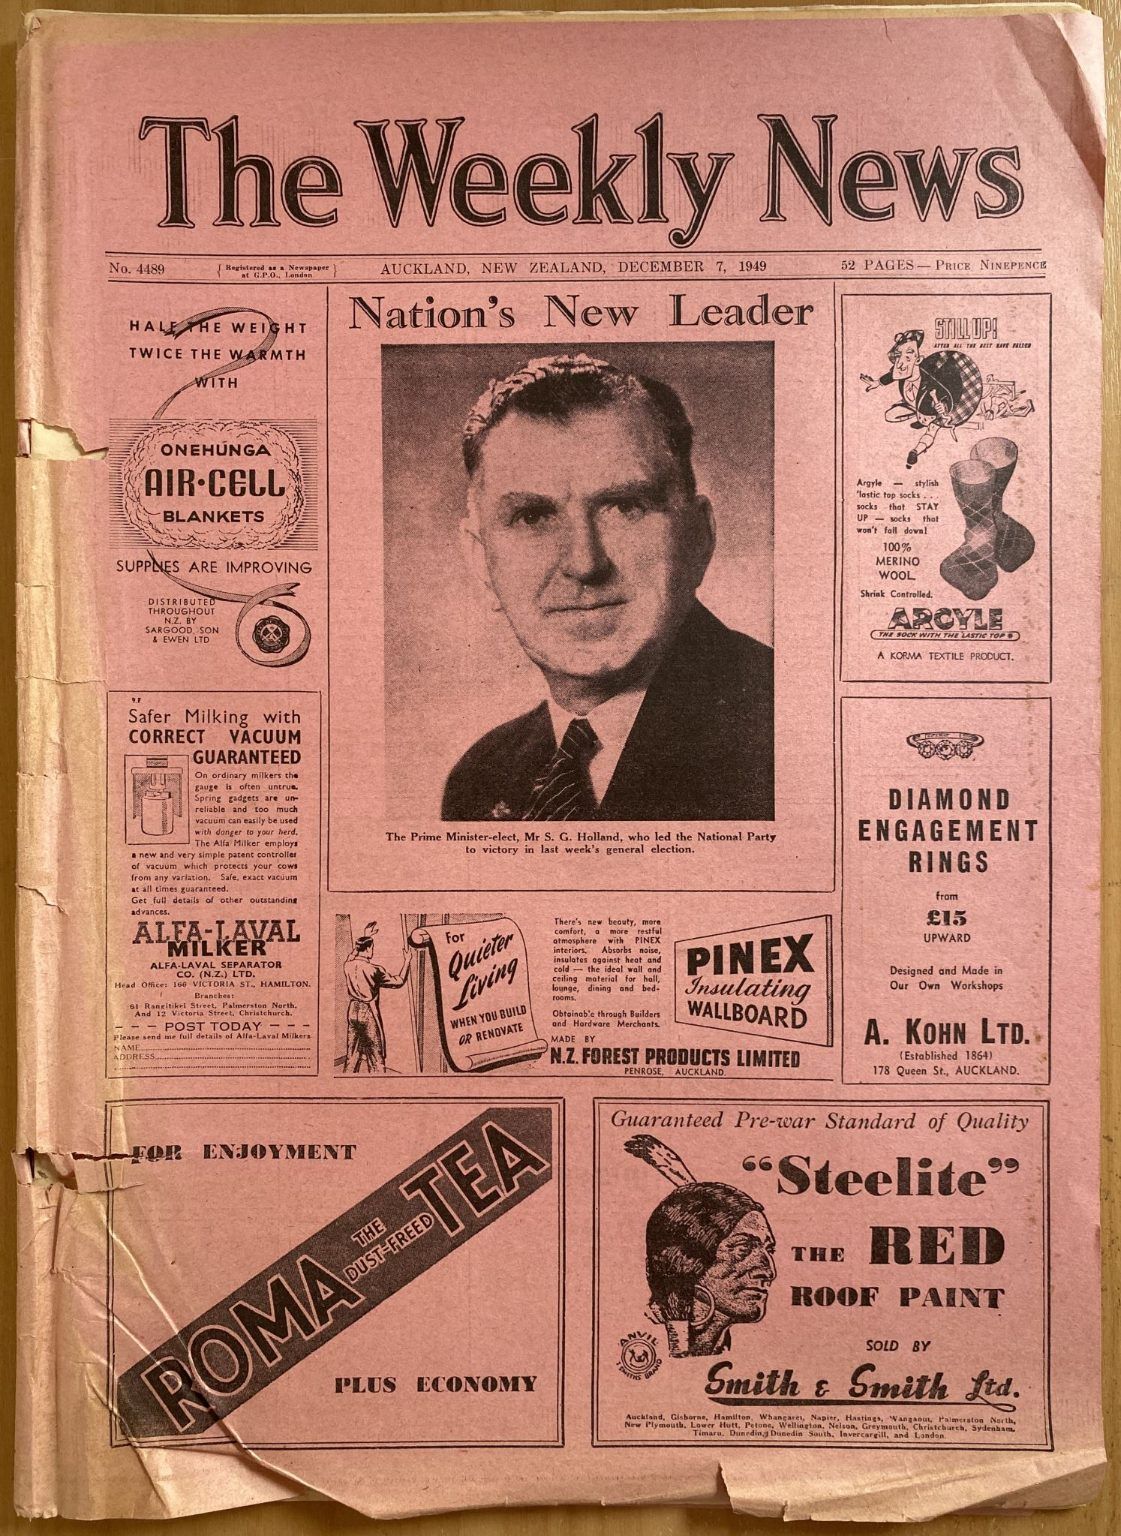 OLD NEWSPAPER: The Weekly News, No. 4489, 7 December 1949